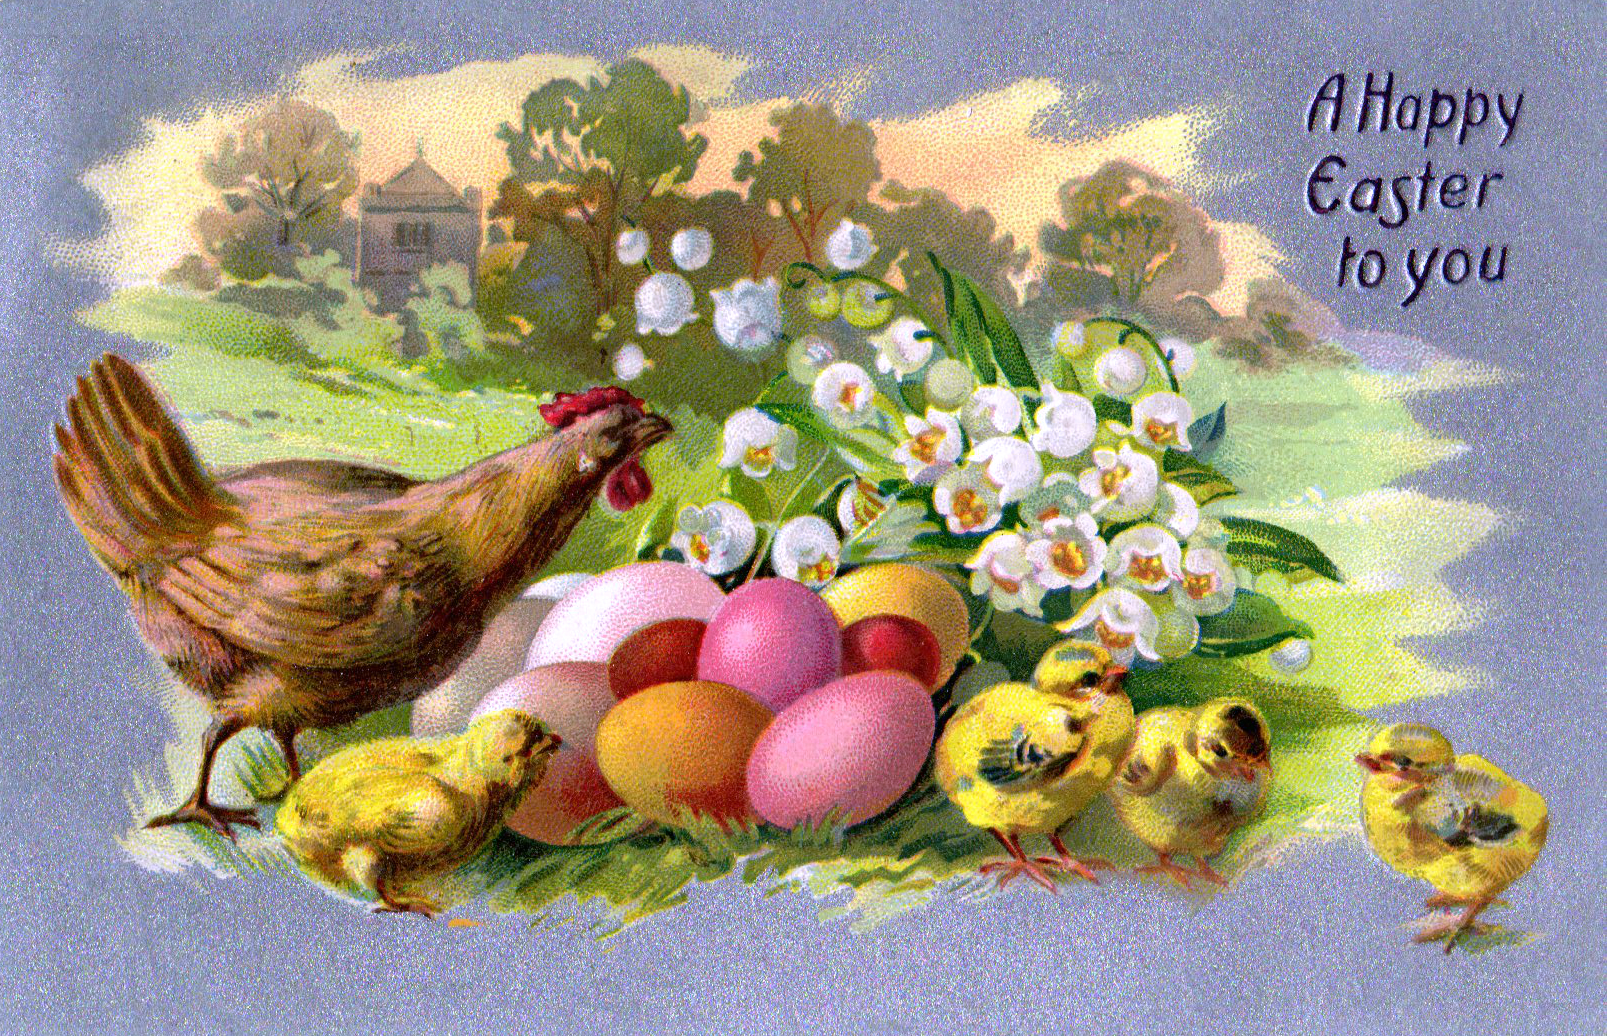 This is a free vintage illustration of a colorful Easter scene from an antique Easter postcard